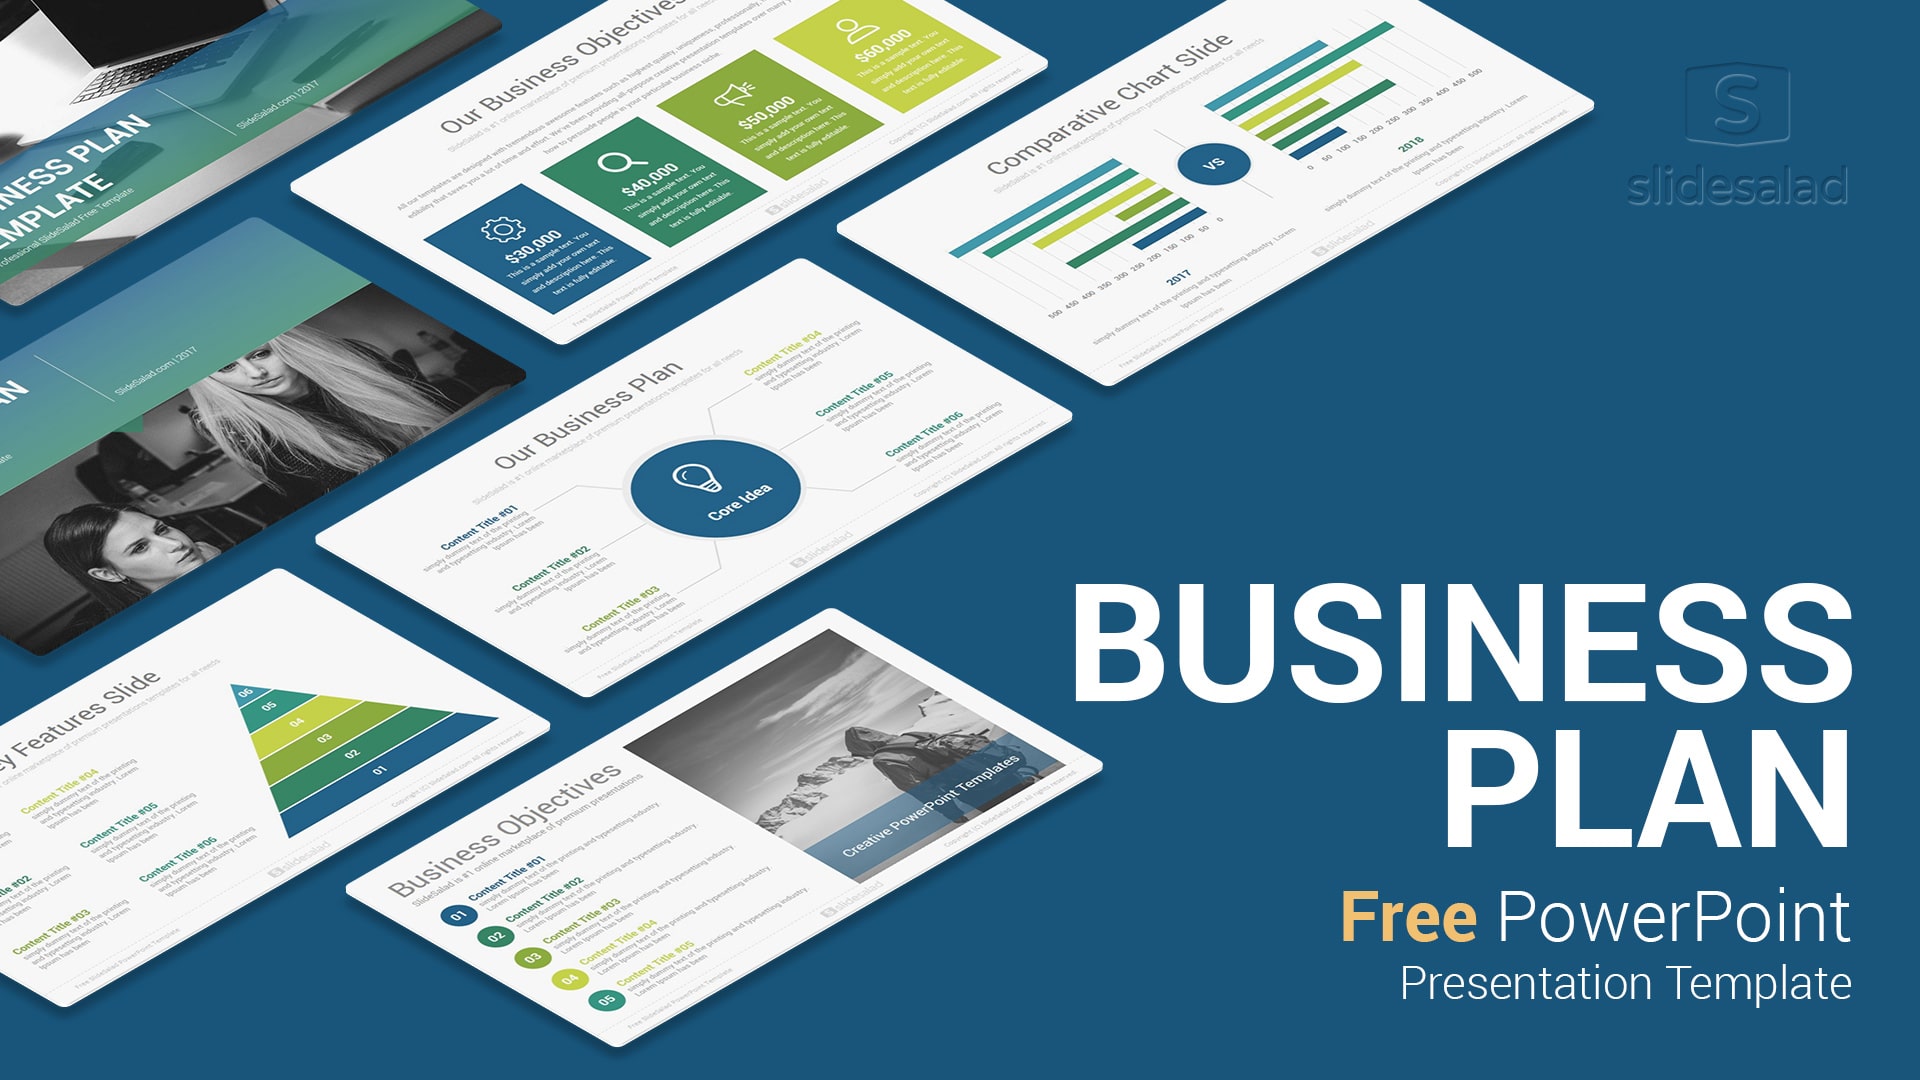 Business Plan Free PowerPoint Presentation Template - SlideSalad With Free Download Powerpoint Templates For Business Presentation